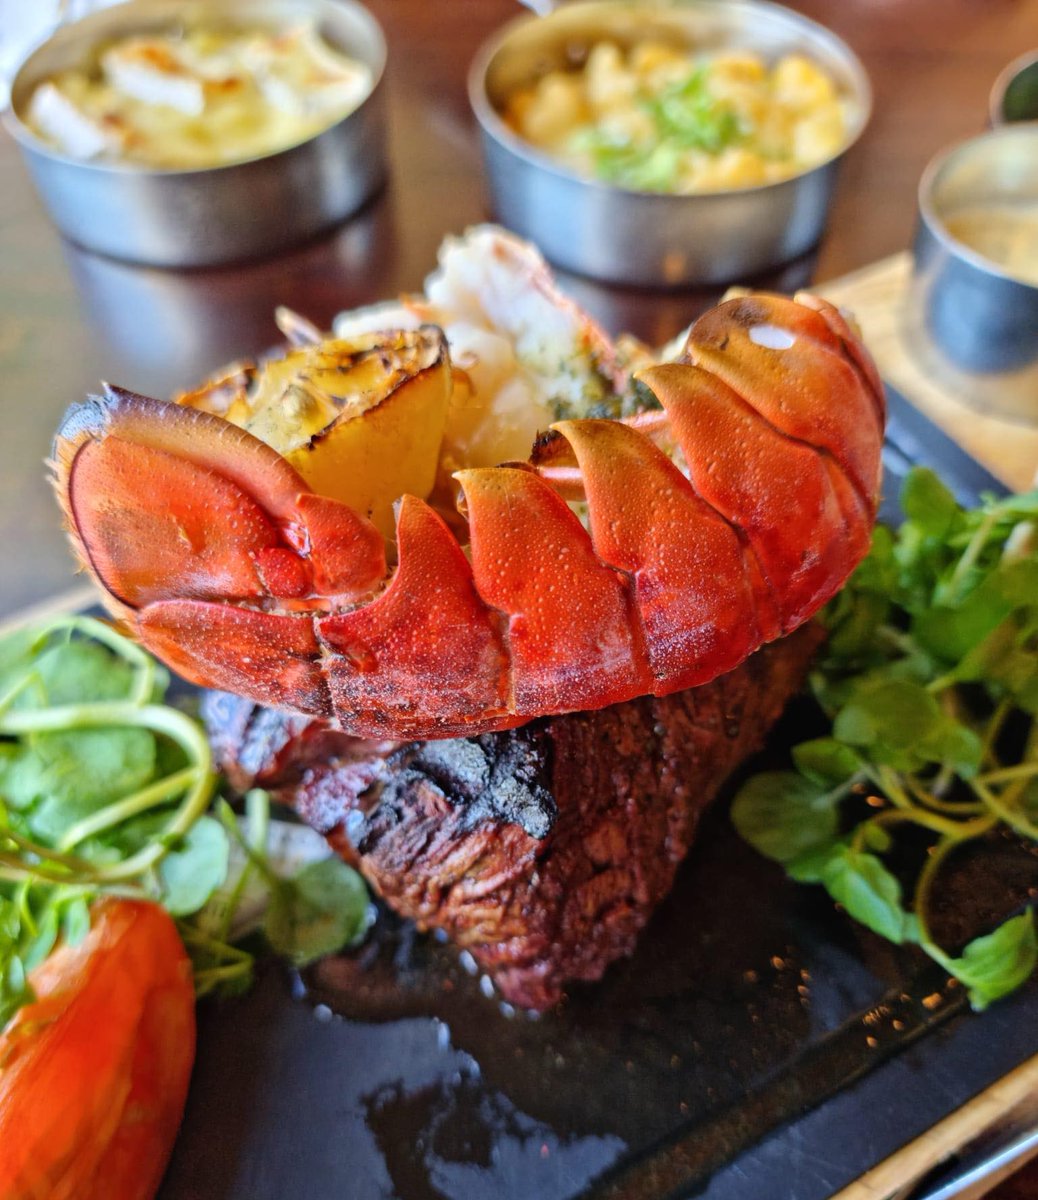 Can’t choose between steak or seafood? 🥩🦞 Indulge in both with our delectable Surf & Turf Chateaubriand Sharing Experience for £100. Limited time only. 📸 bristolfooddude on Instagram